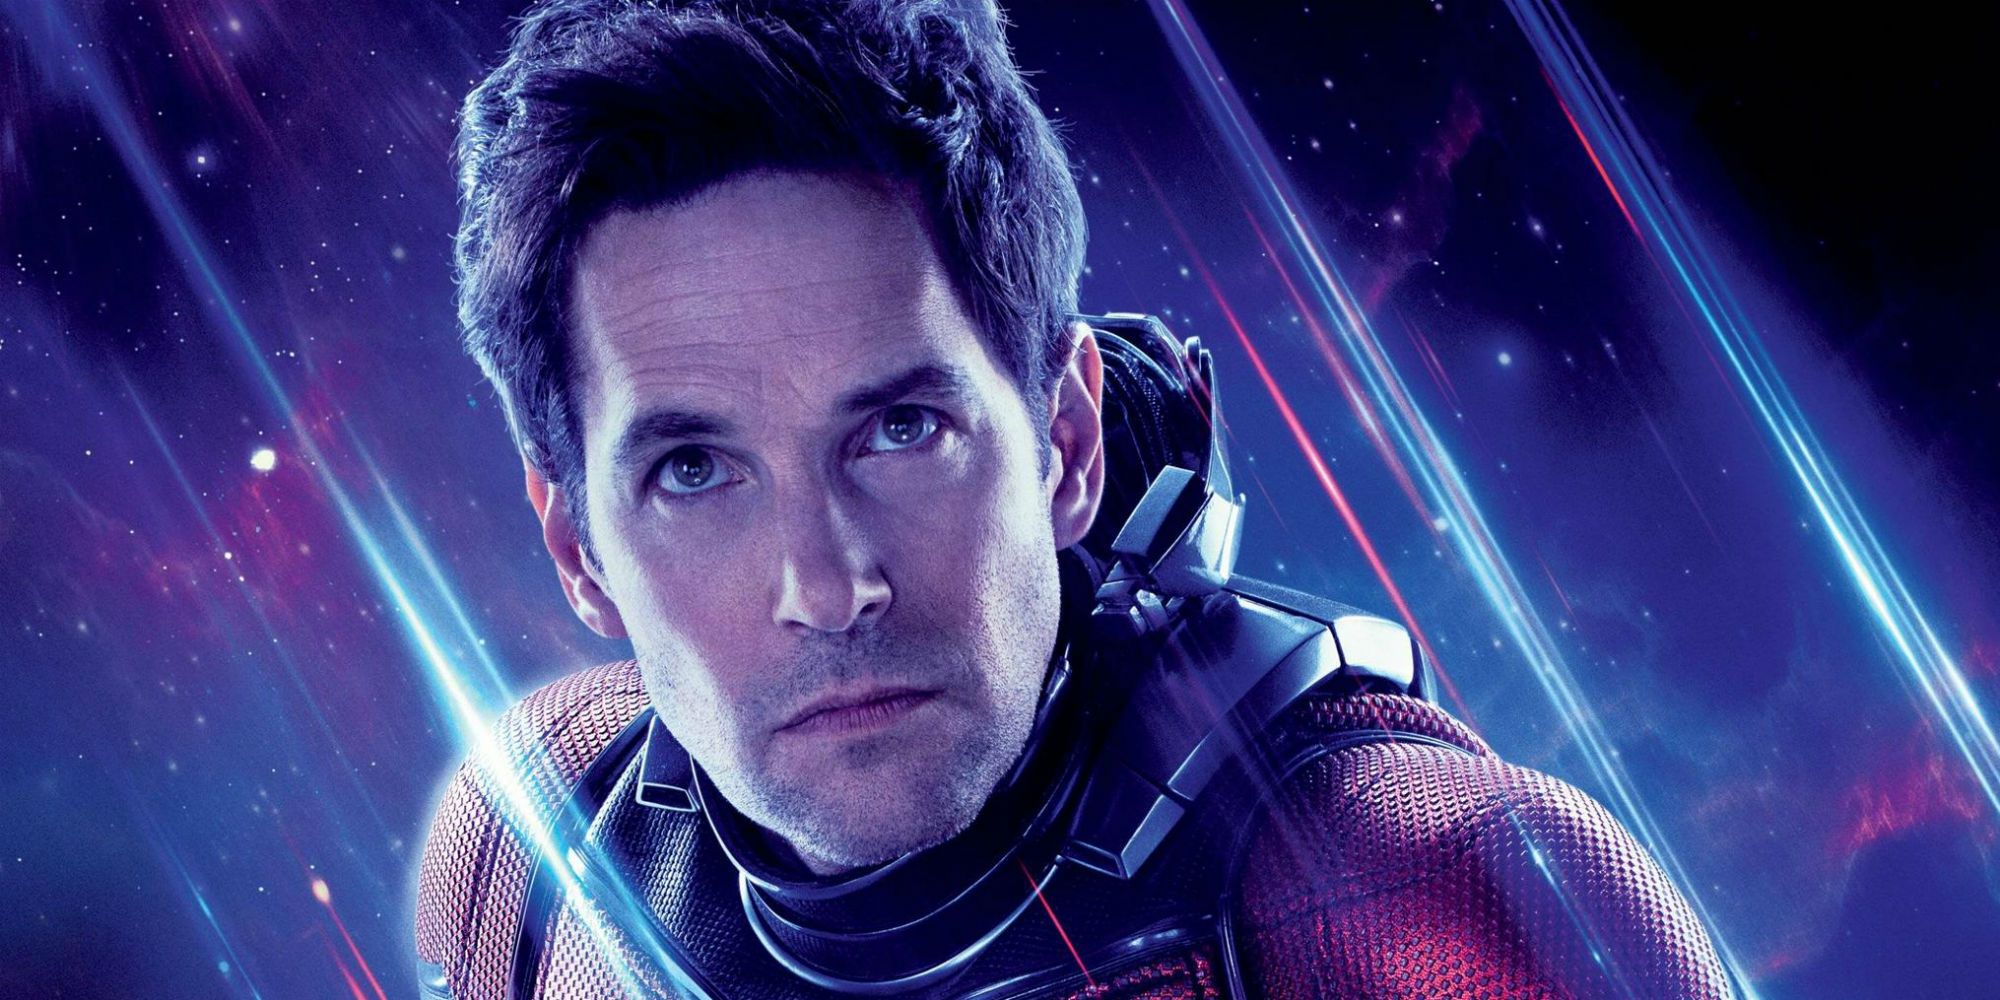 Poster for Avengers: Endgame featuring Paul Rudd as Ant-Man 